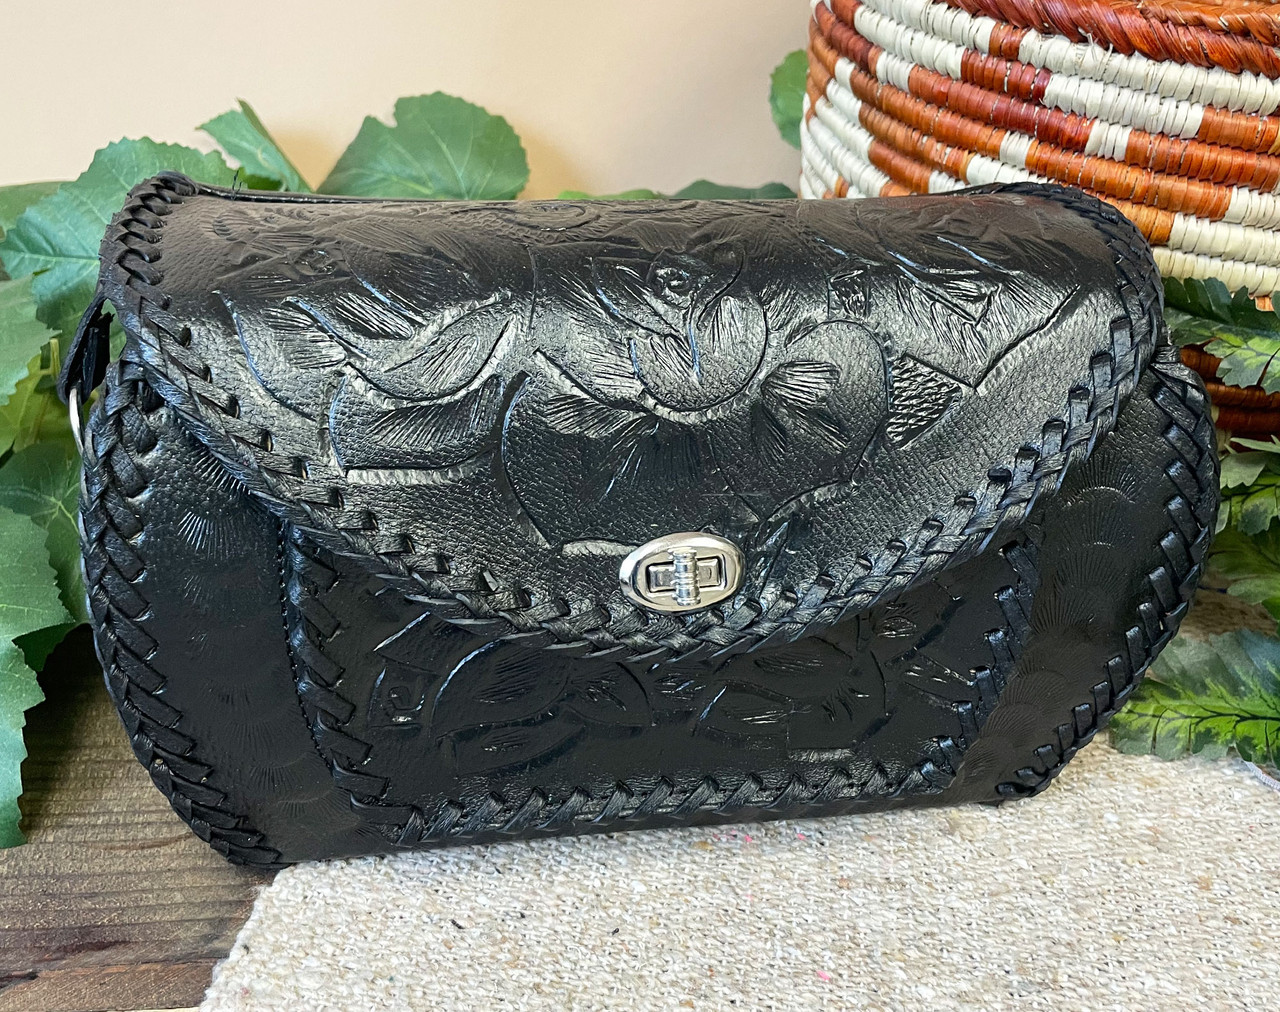 Ladies Leather Hand Purse Manufacturer, Supplier and Exporter from India